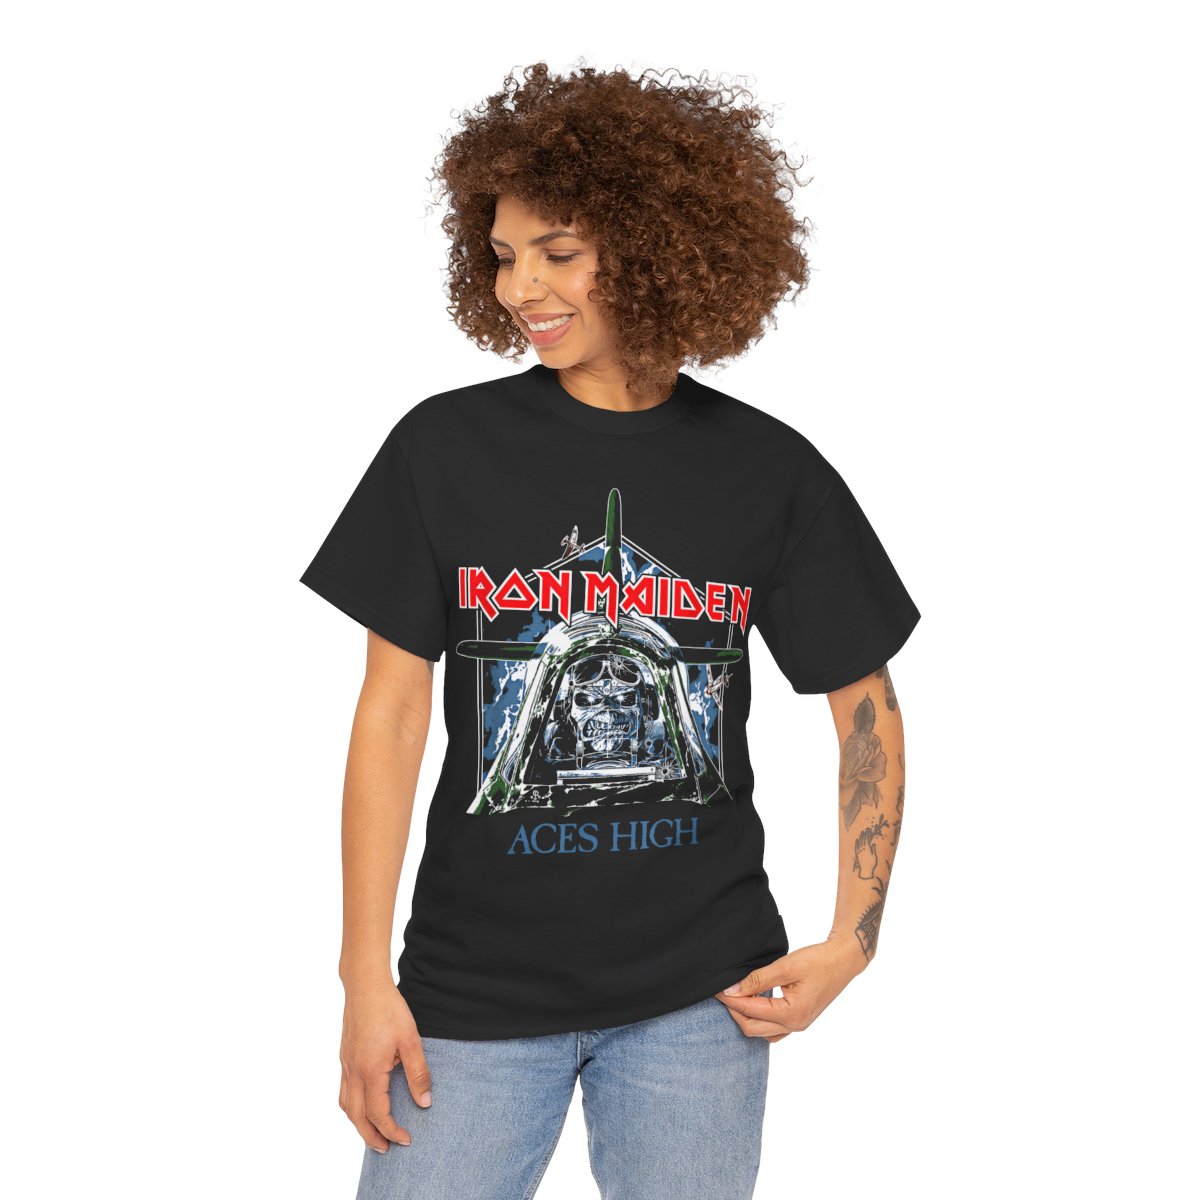 Iron Maiden, Aces High Graphic T-Shirt